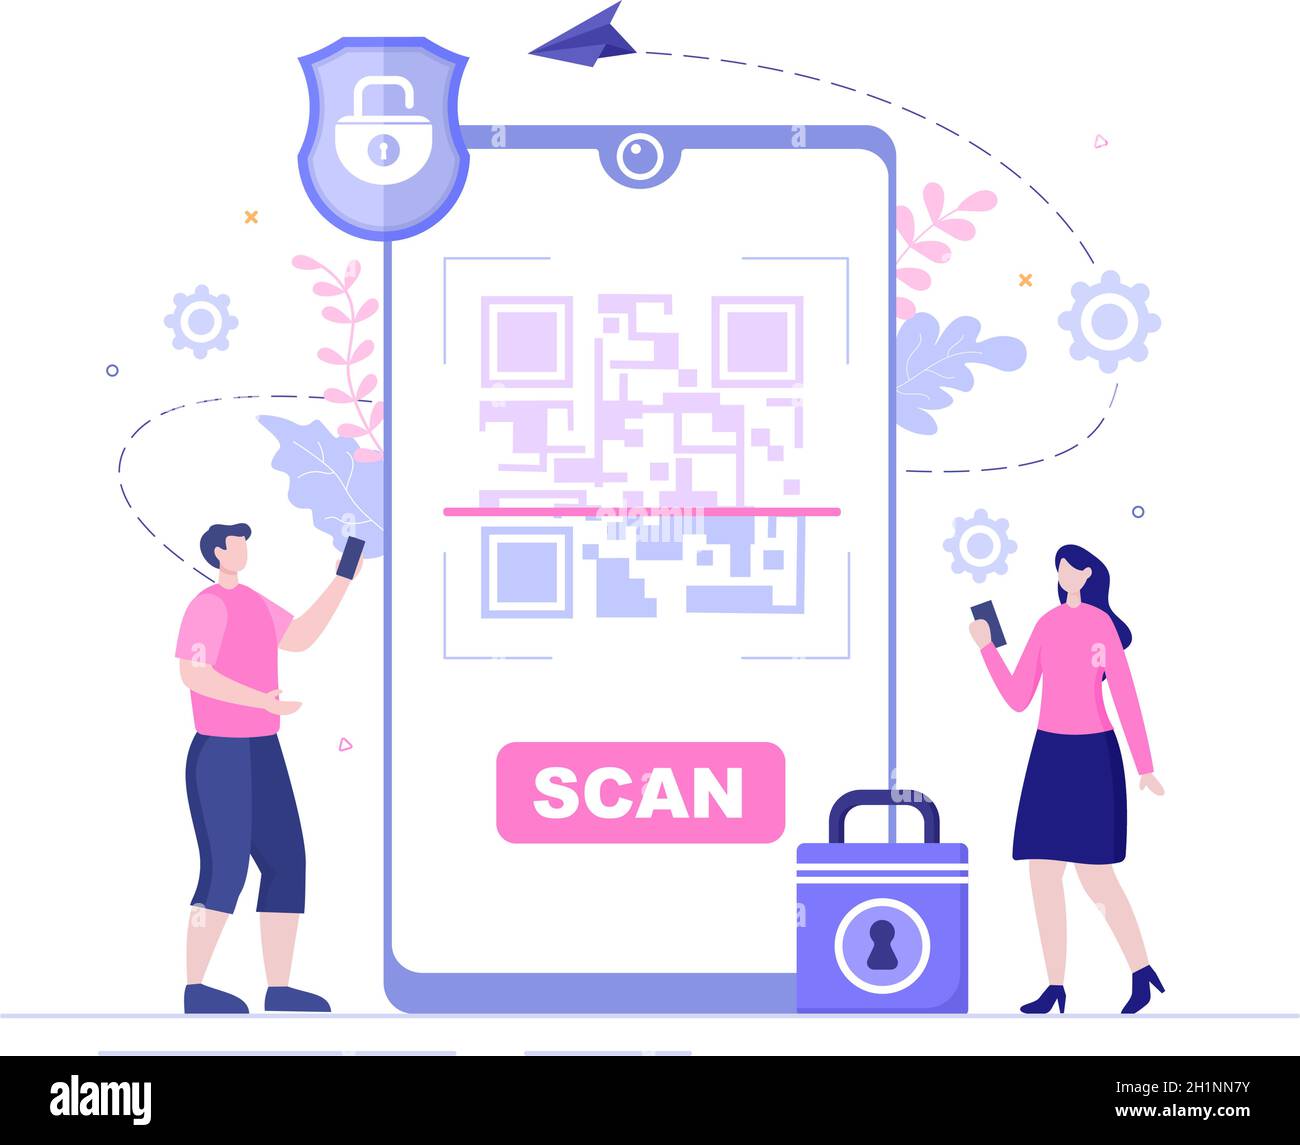 QR Code Scanner for Online Payment, Electronic Pay and Money Transfer on Smartphone with App in Hand. Background Vector Illustration Stock Vector